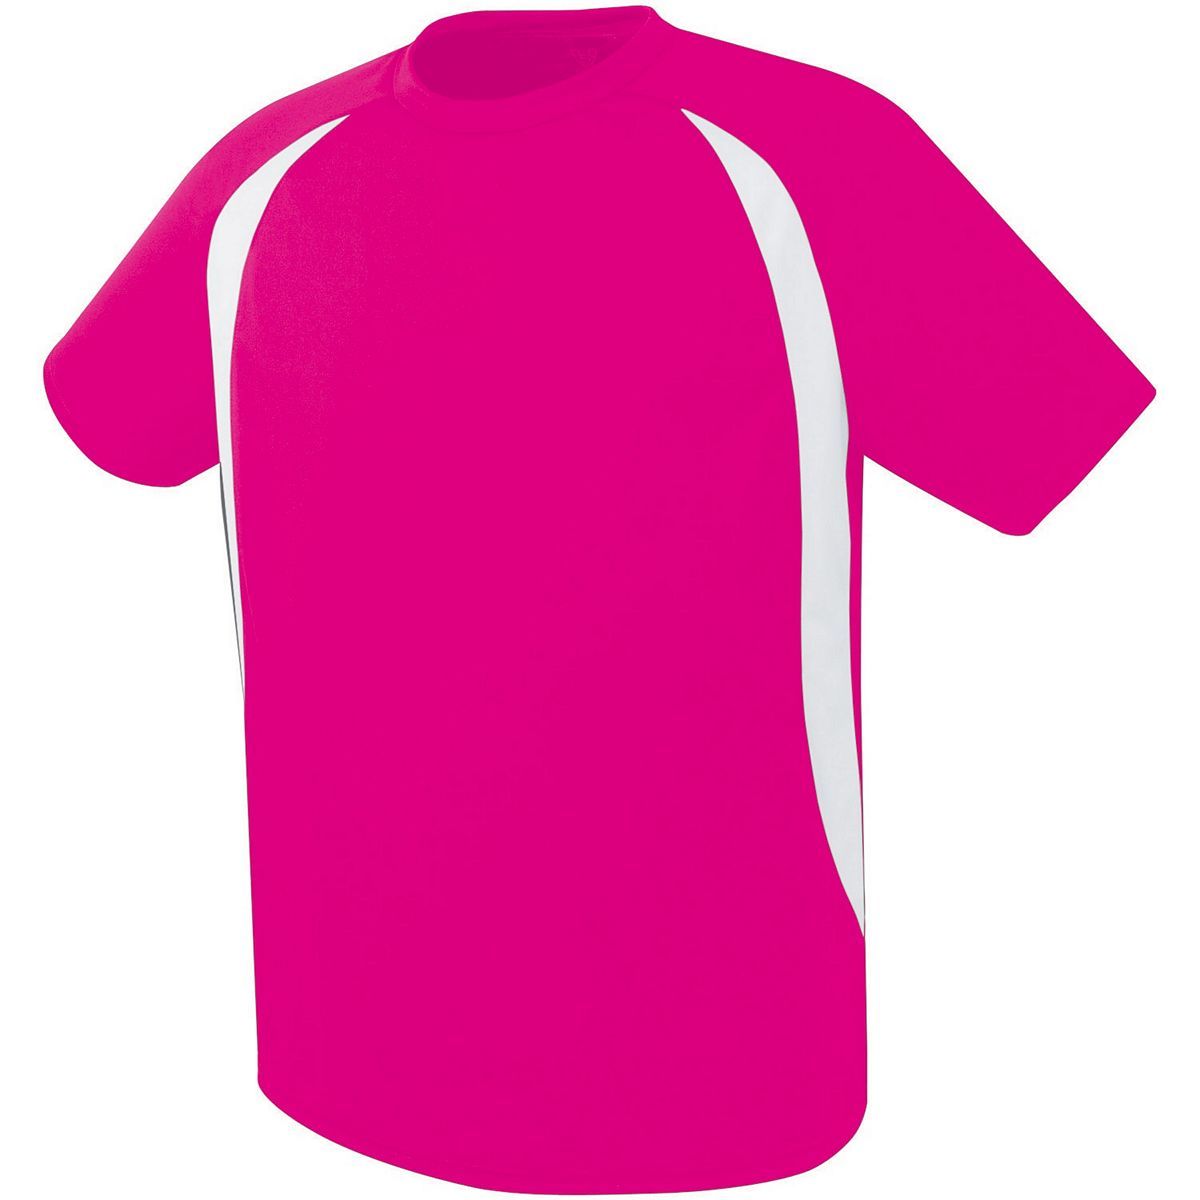 High 5 Liberty  Soccer Jersey in Raspberry/White  -Part of the Adult, Adult-Jersey, High5-Products, Soccer, Shirts, All-Sports-1 product lines at KanaleyCreations.com